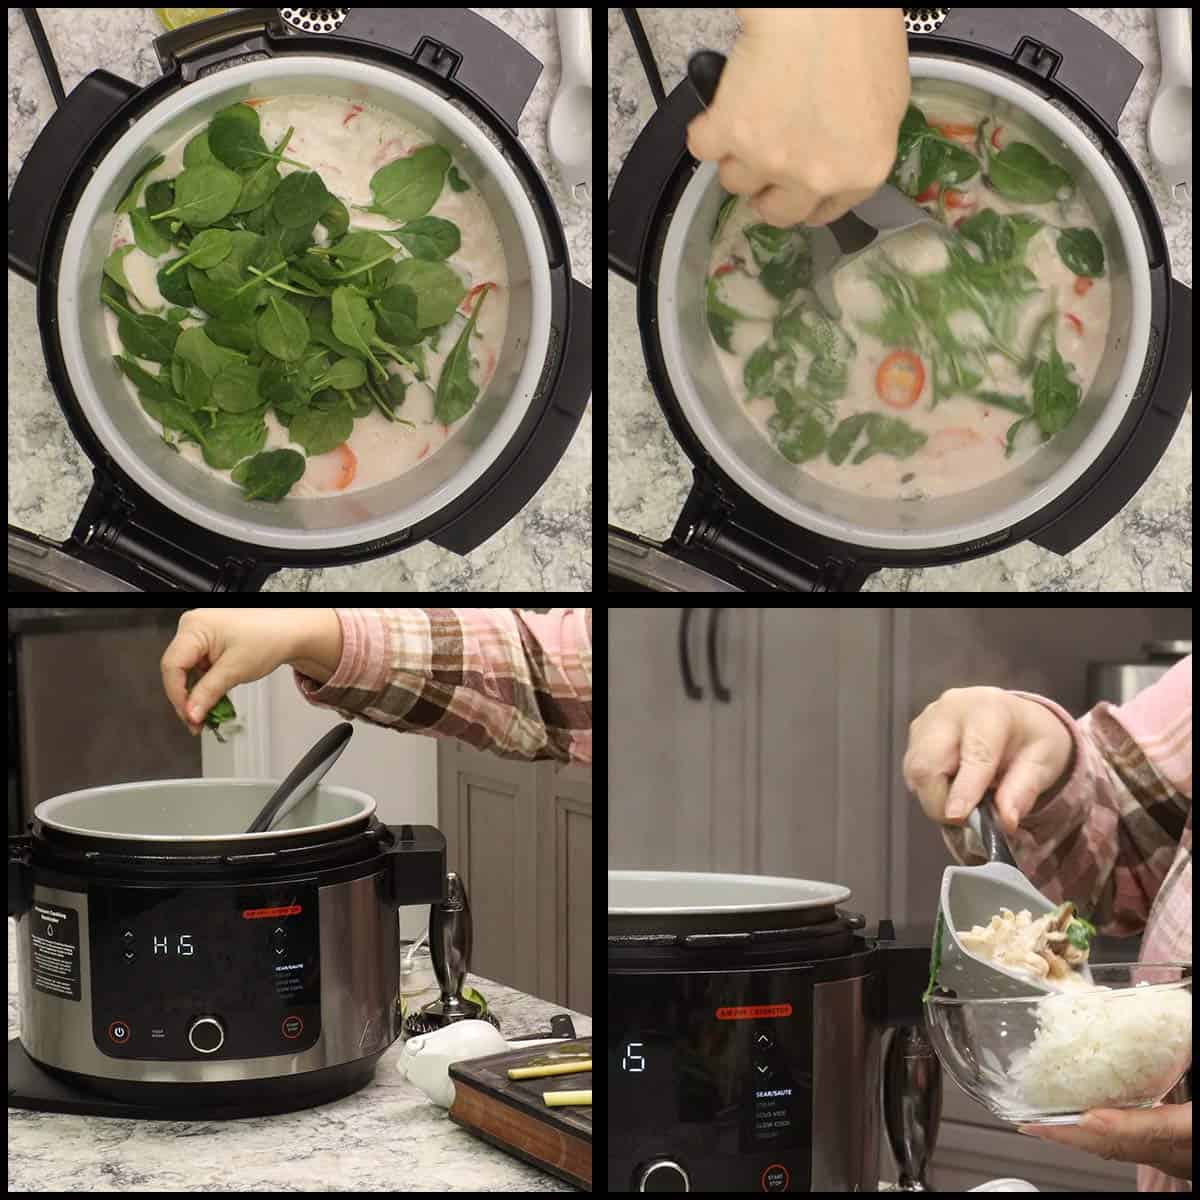 adding spinach and Thai basil to soup before serving.